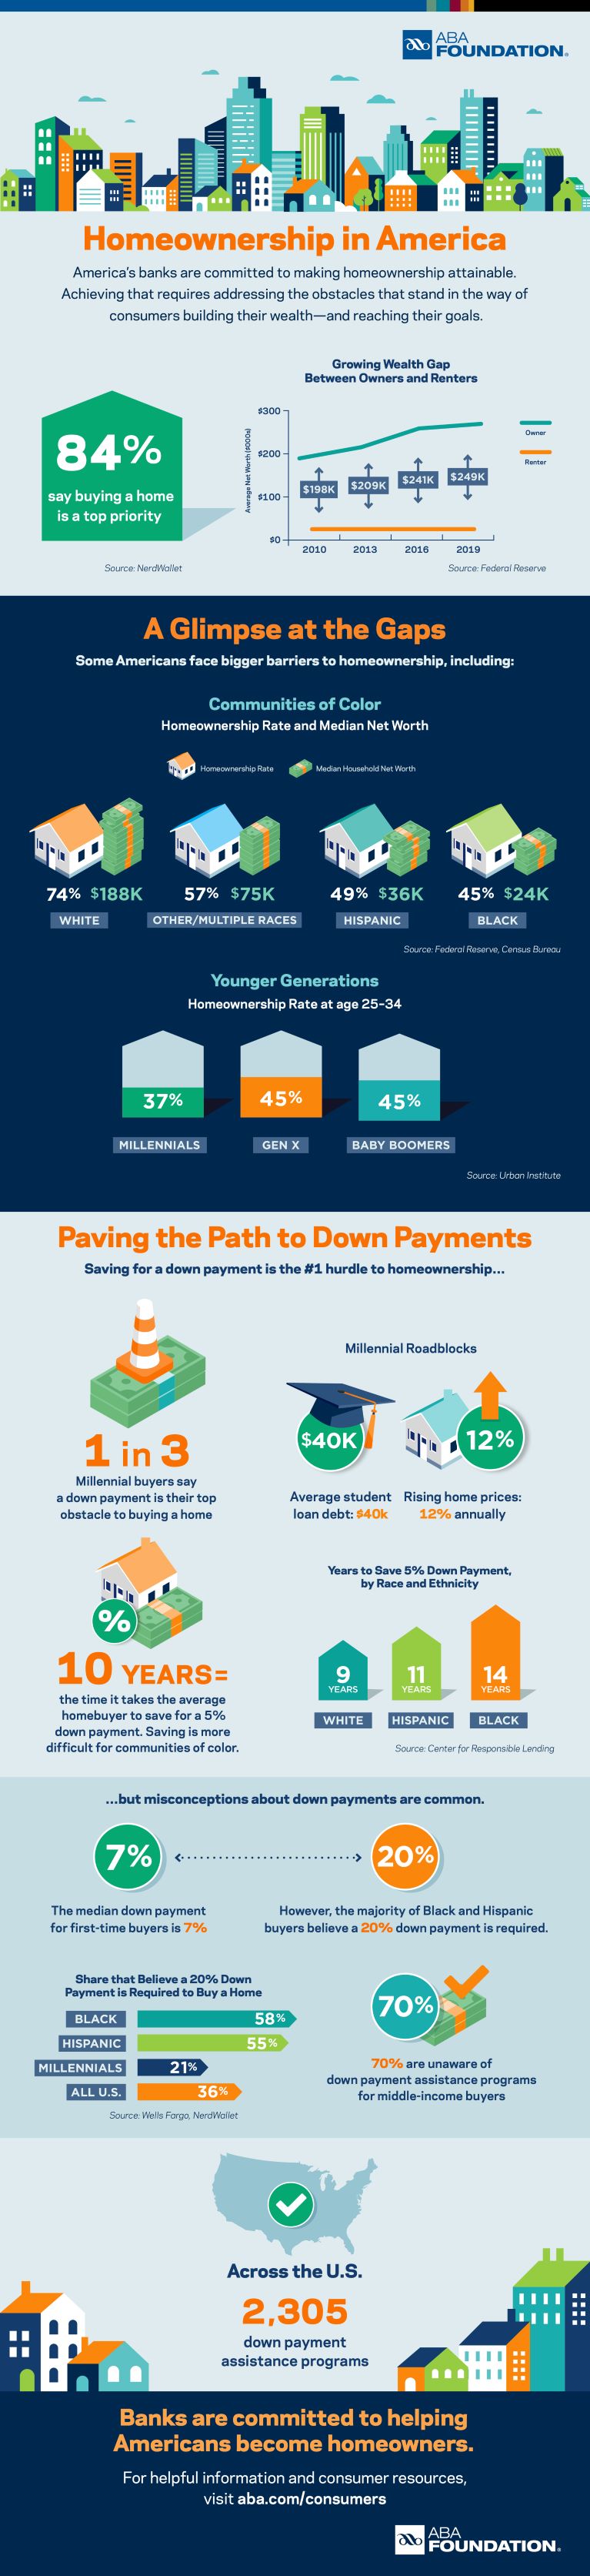 Infographic on homeownership